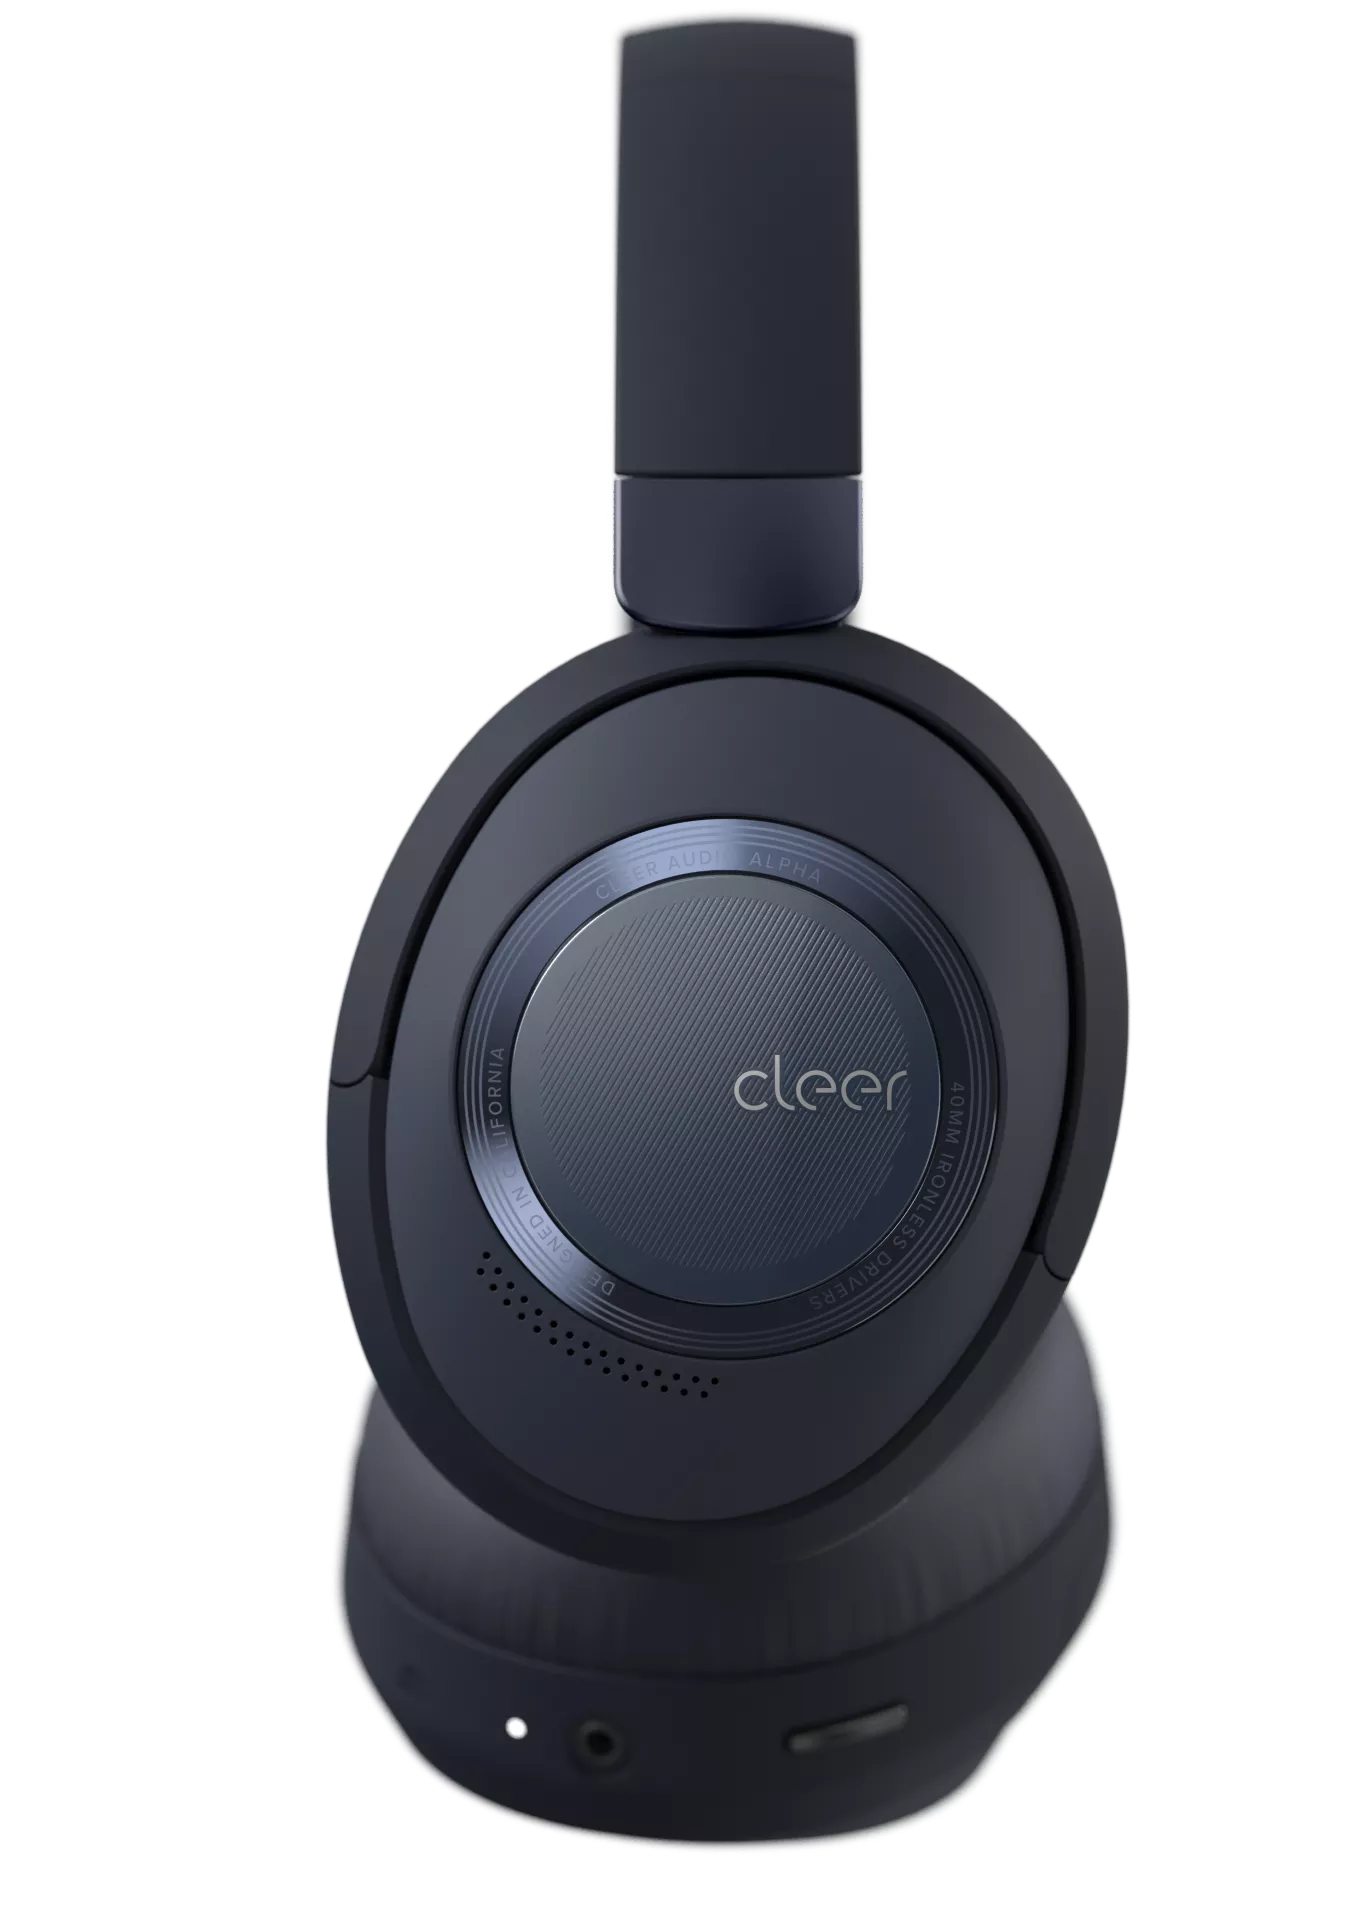 Cleer Alpha - Foldable Active Noise Cancelling Wireless Headphones